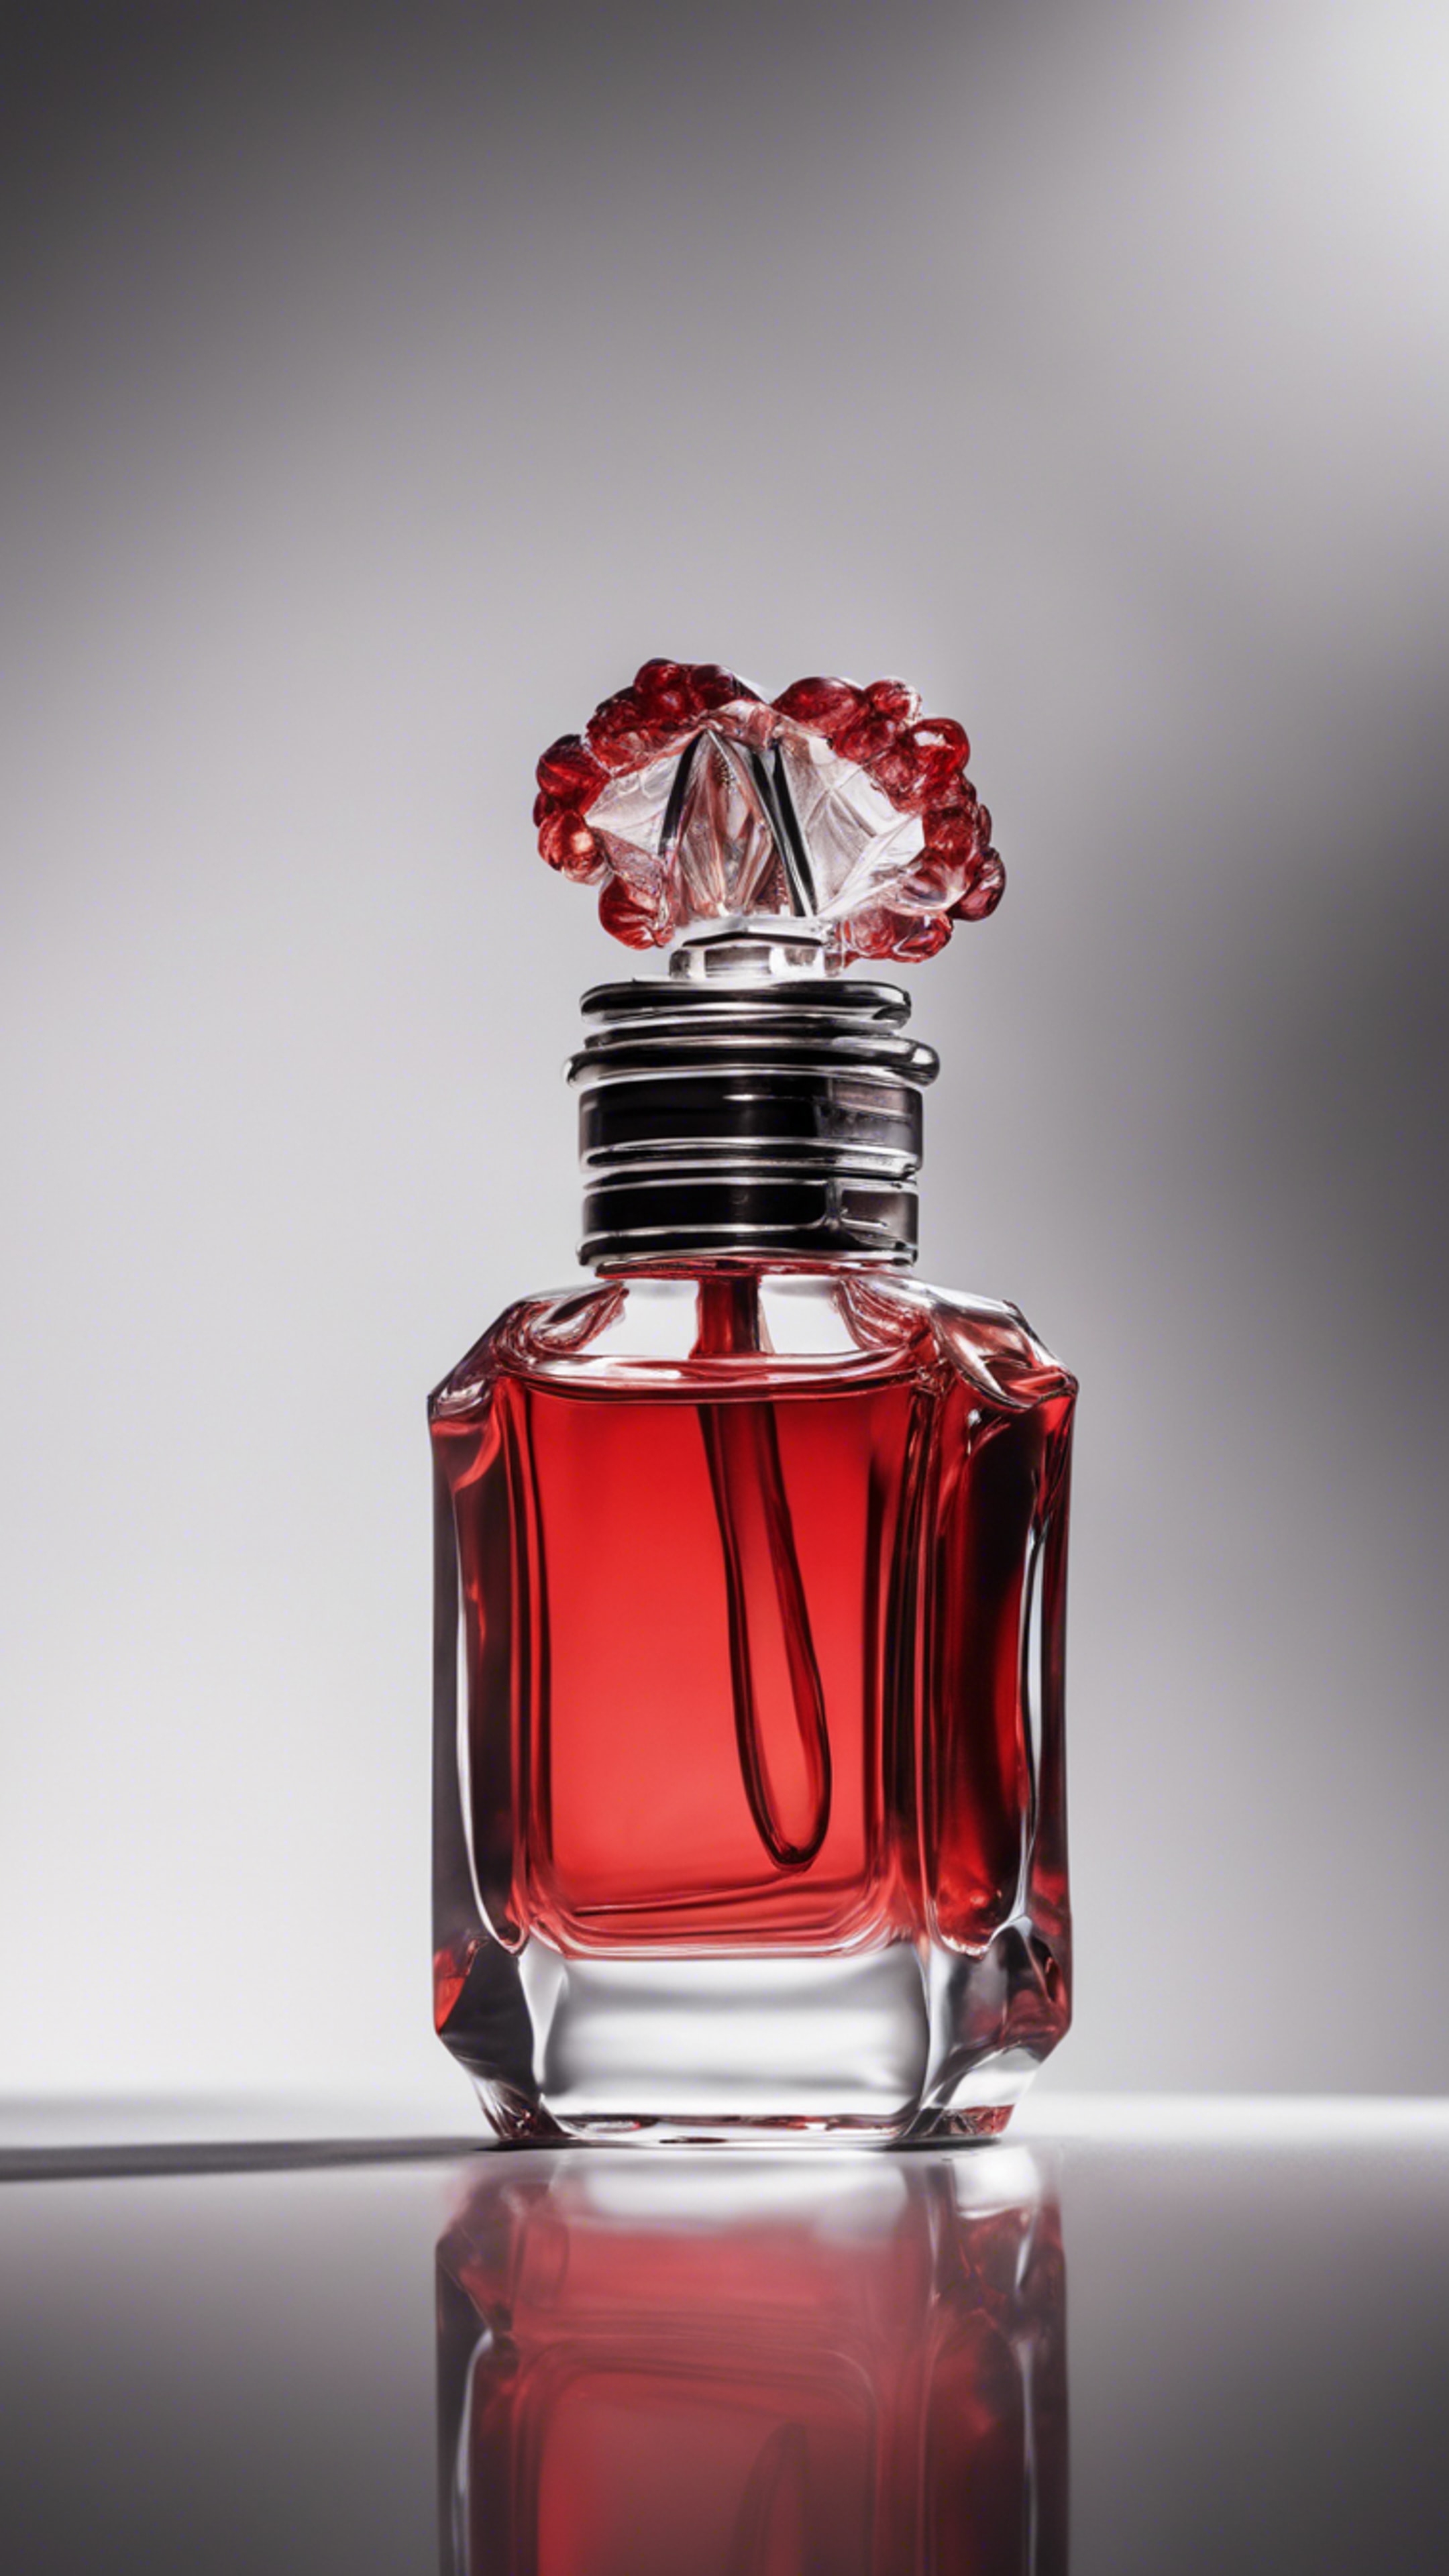 The portrait of a sassy red perfume bottle clashing against a pure white backdrop. 墙纸[8445b62606744831bb5a]